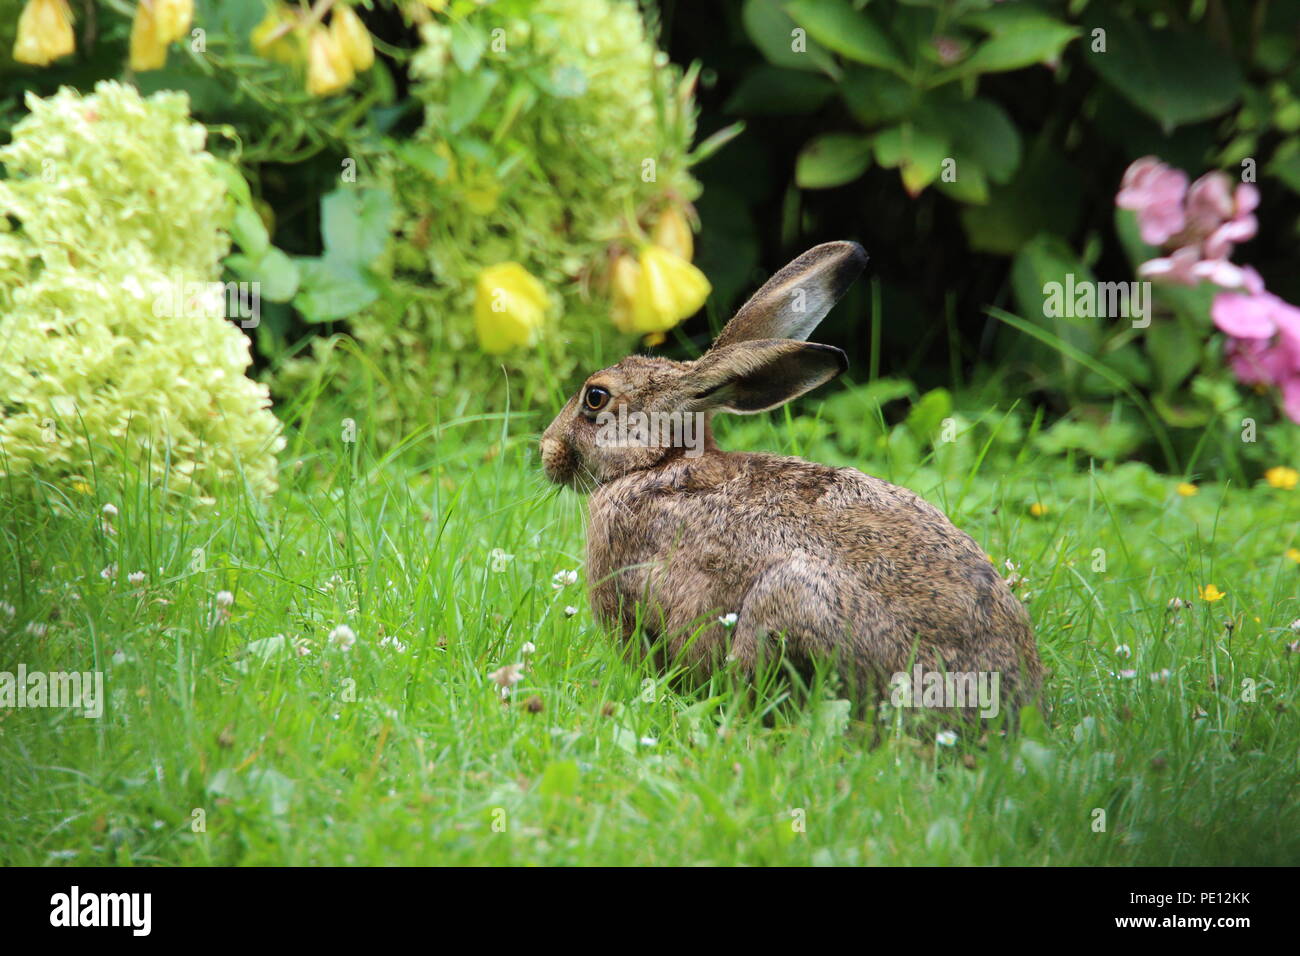 Brown hare in the Meadow in front of flowerbeds Stock Photo